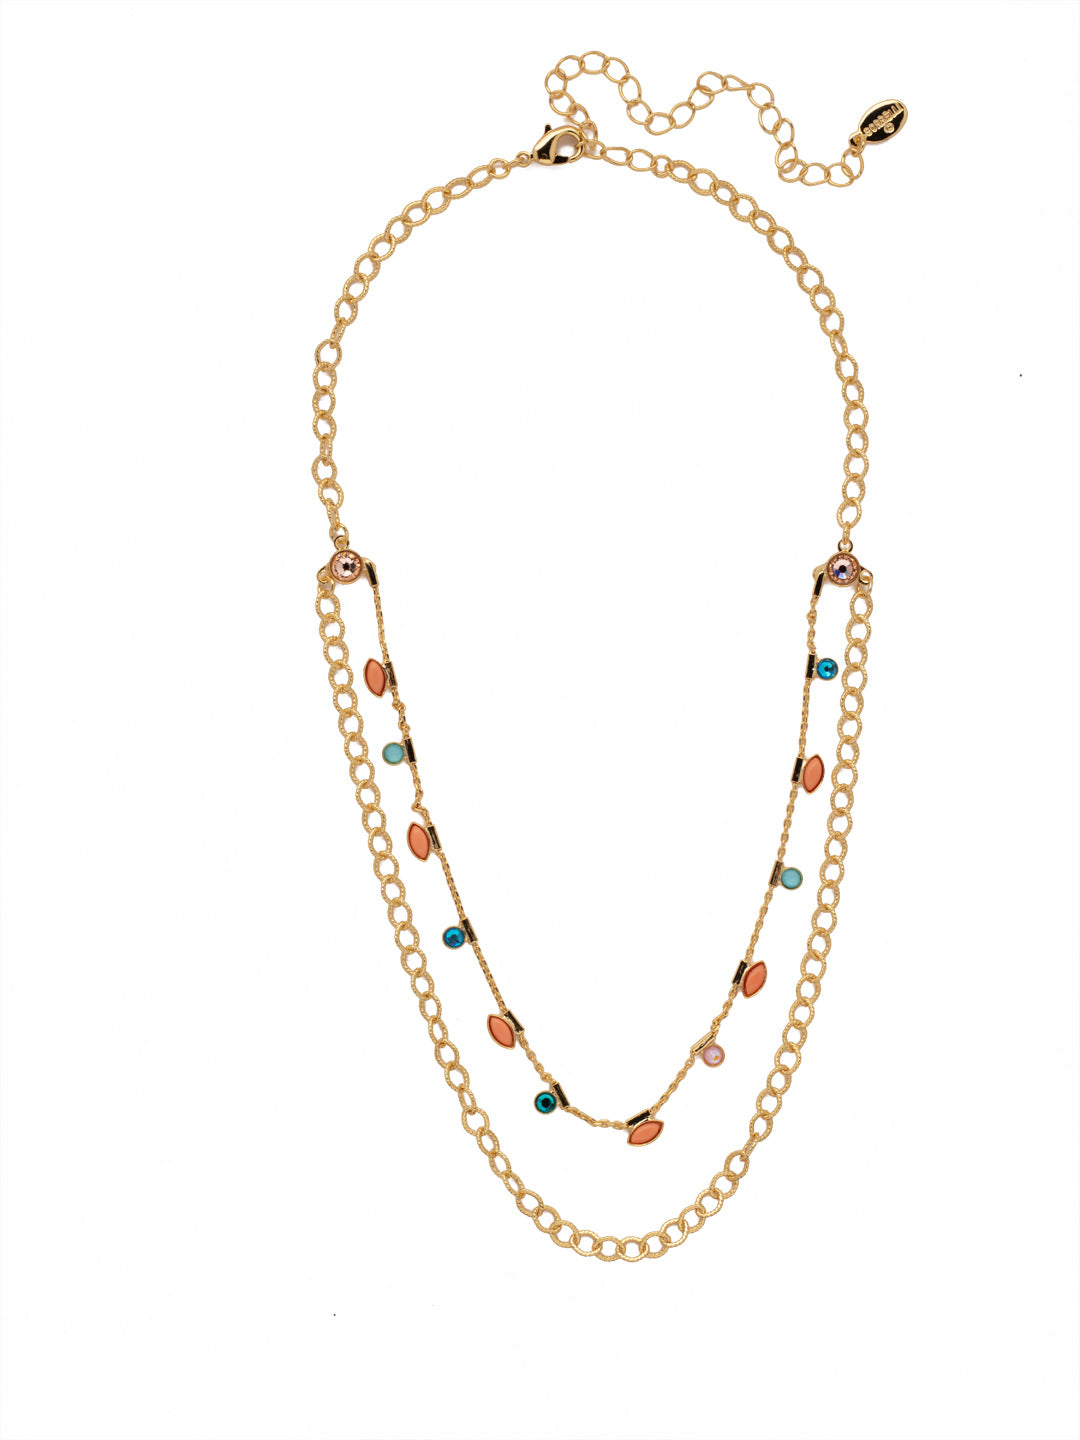 Cruella Layered Necklace - NEV8BGSOP - <p>Fasten on our Cruella Layered Necklace and get two looks in one: chainlink metal and signature Sorrelli sparkle coming from round and navette stones. From Sorrelli's South Pacific collection in our Bright Gold-tone finish.</p>